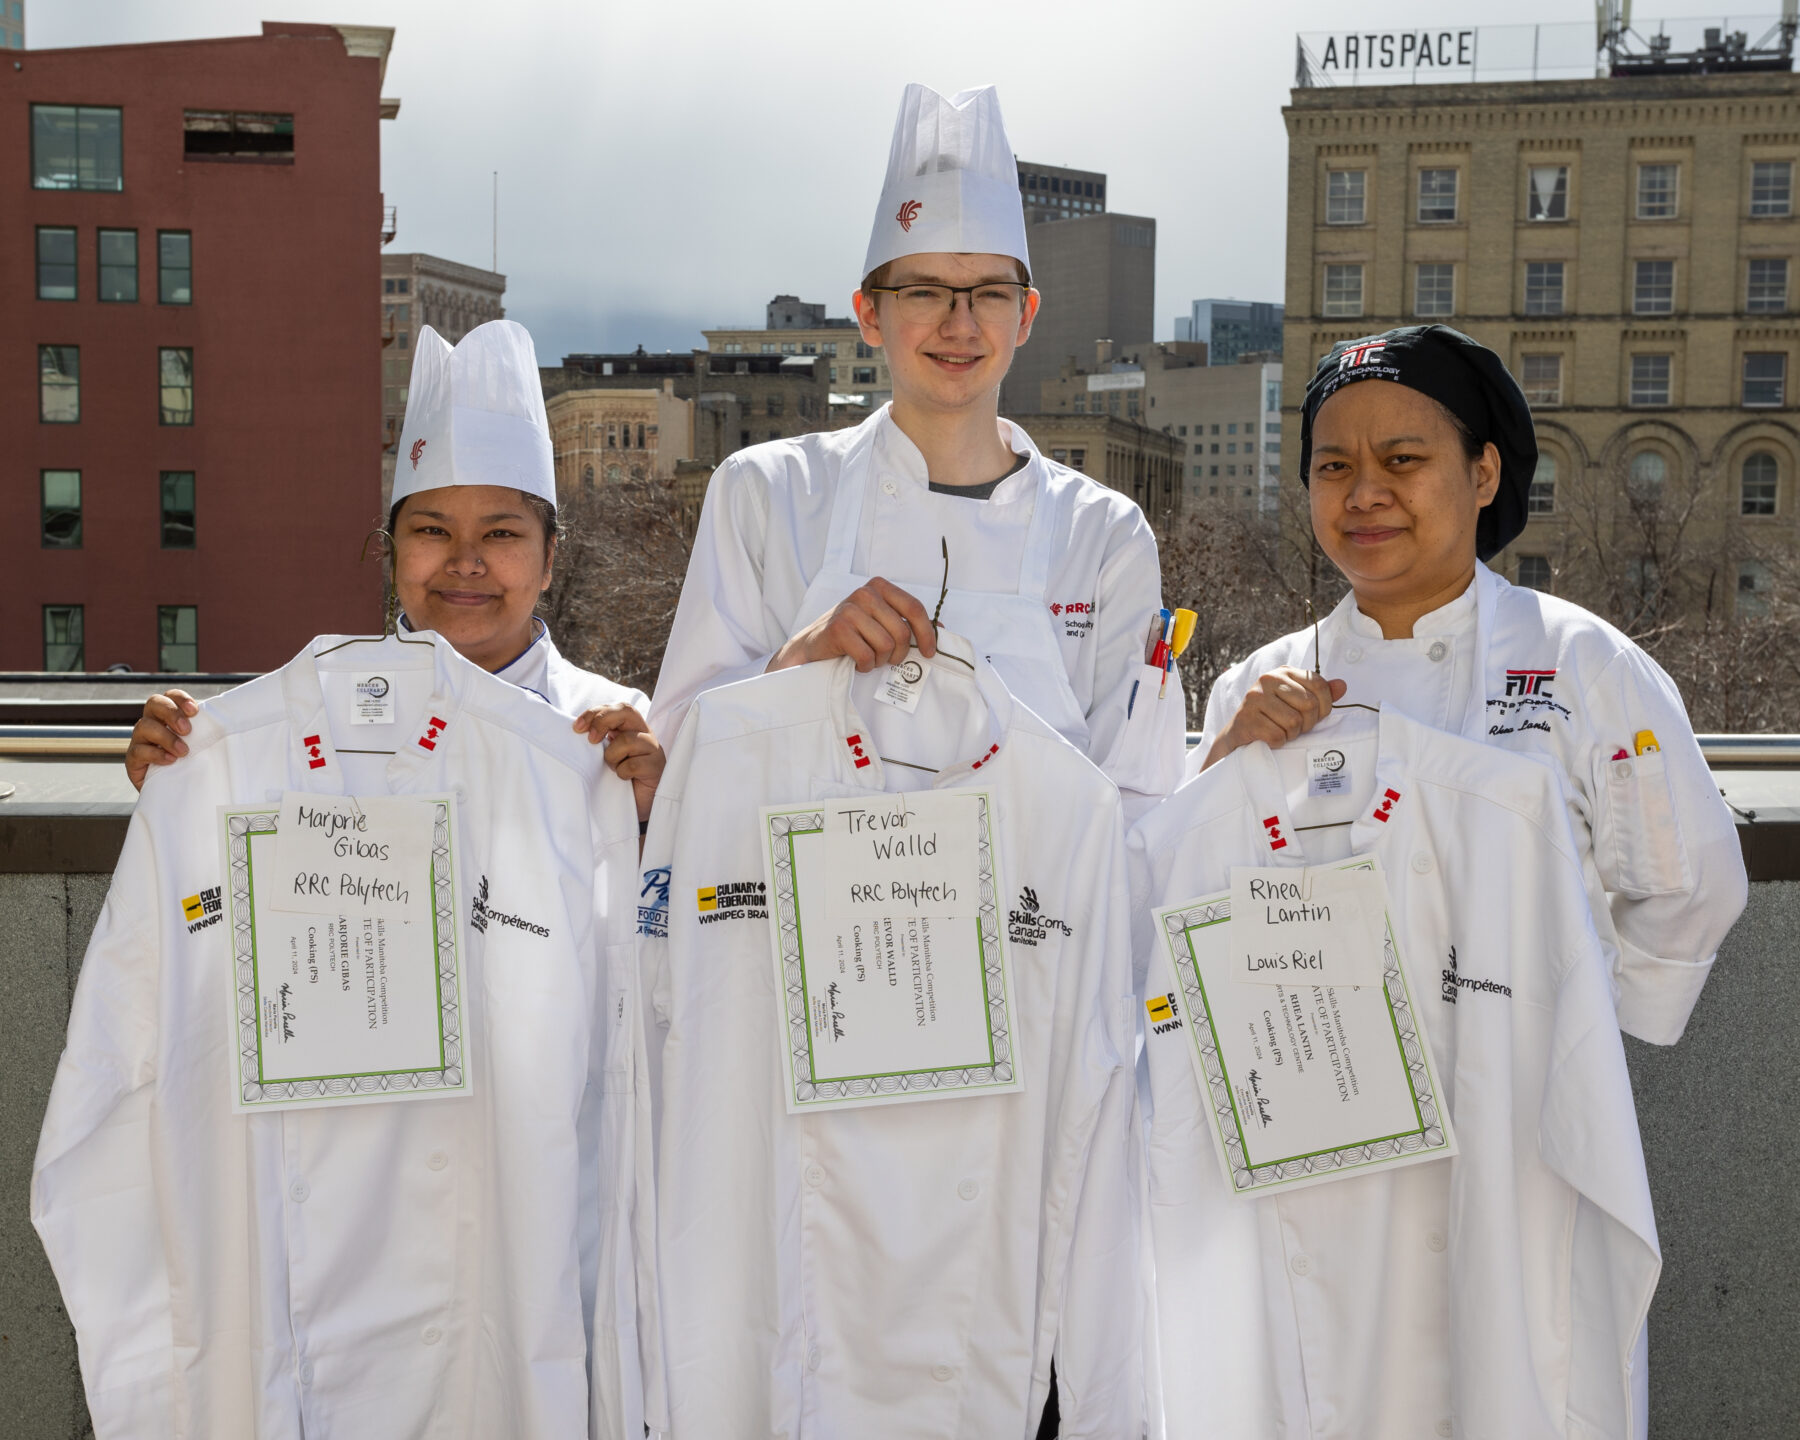 Three culinary students stand in the chef's white atop a rooftop parkade. They are holding winners certificates in front of them and smiling.